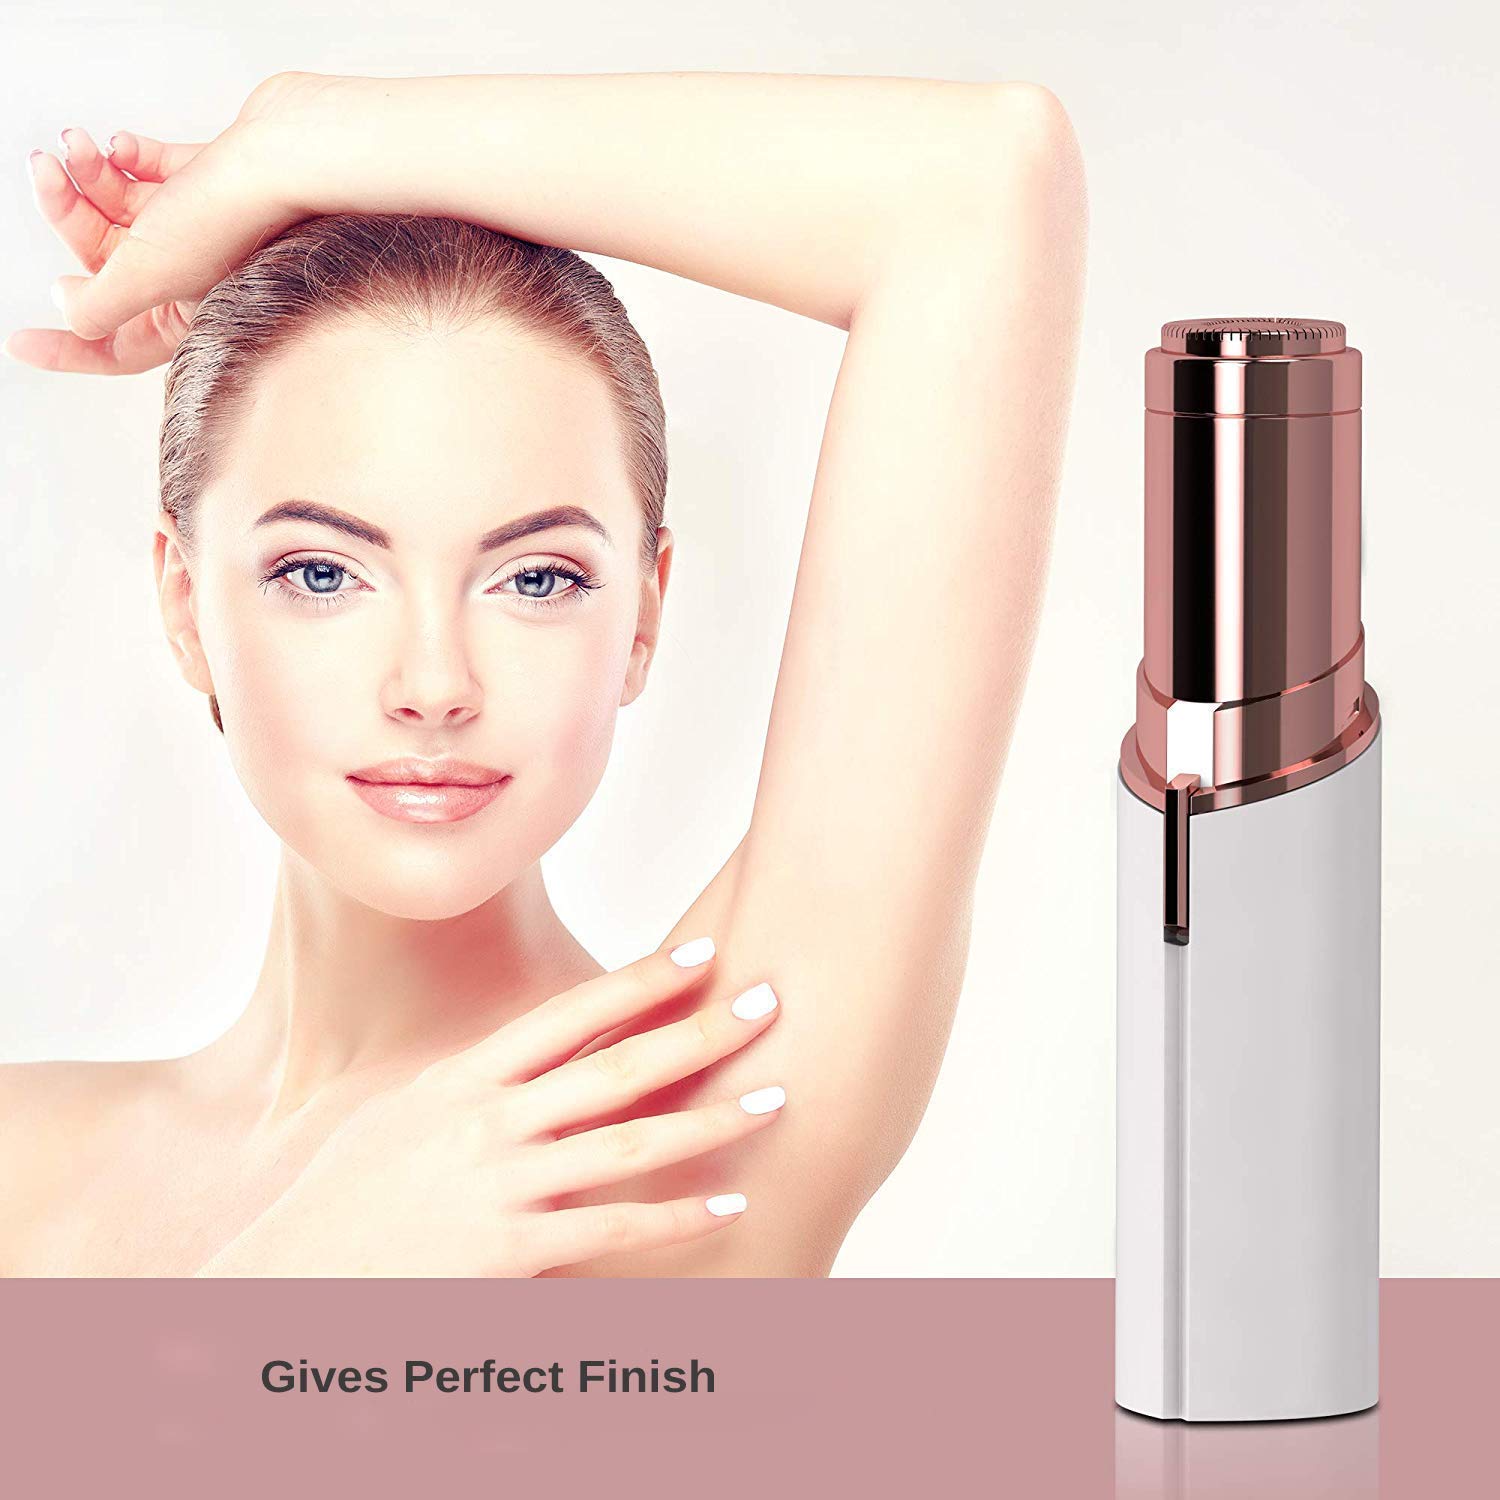 VIO Finishing Touch Facial Body Flawless Shaver Women Painless Hair Remover Face Hair Remover and Eyebrow Trimmer, Hair Shaver and Remover, Lipstick Style